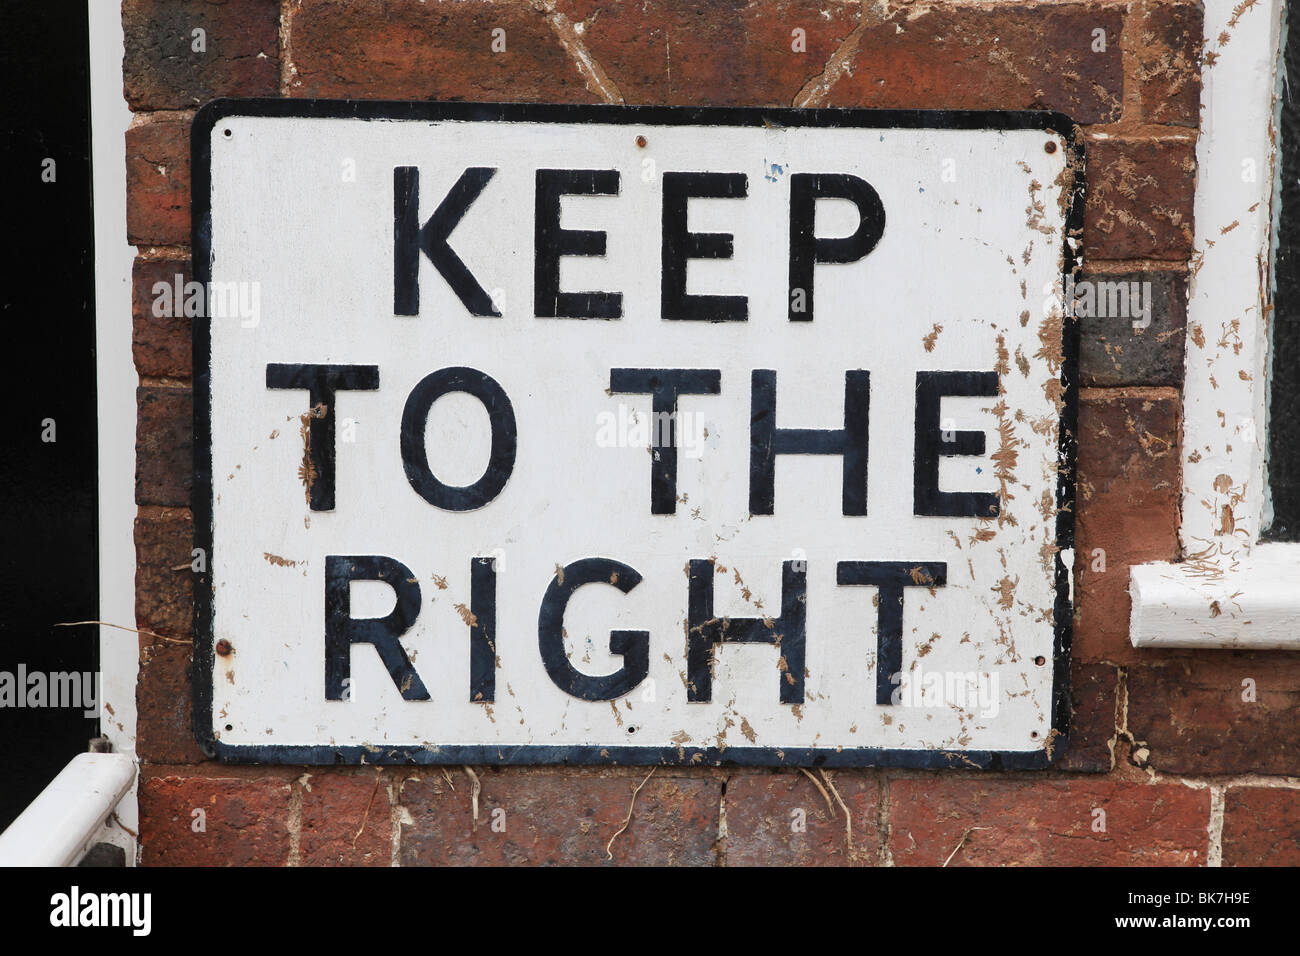 a keep to the right sign outside a public toilet in the UK Stock Photo